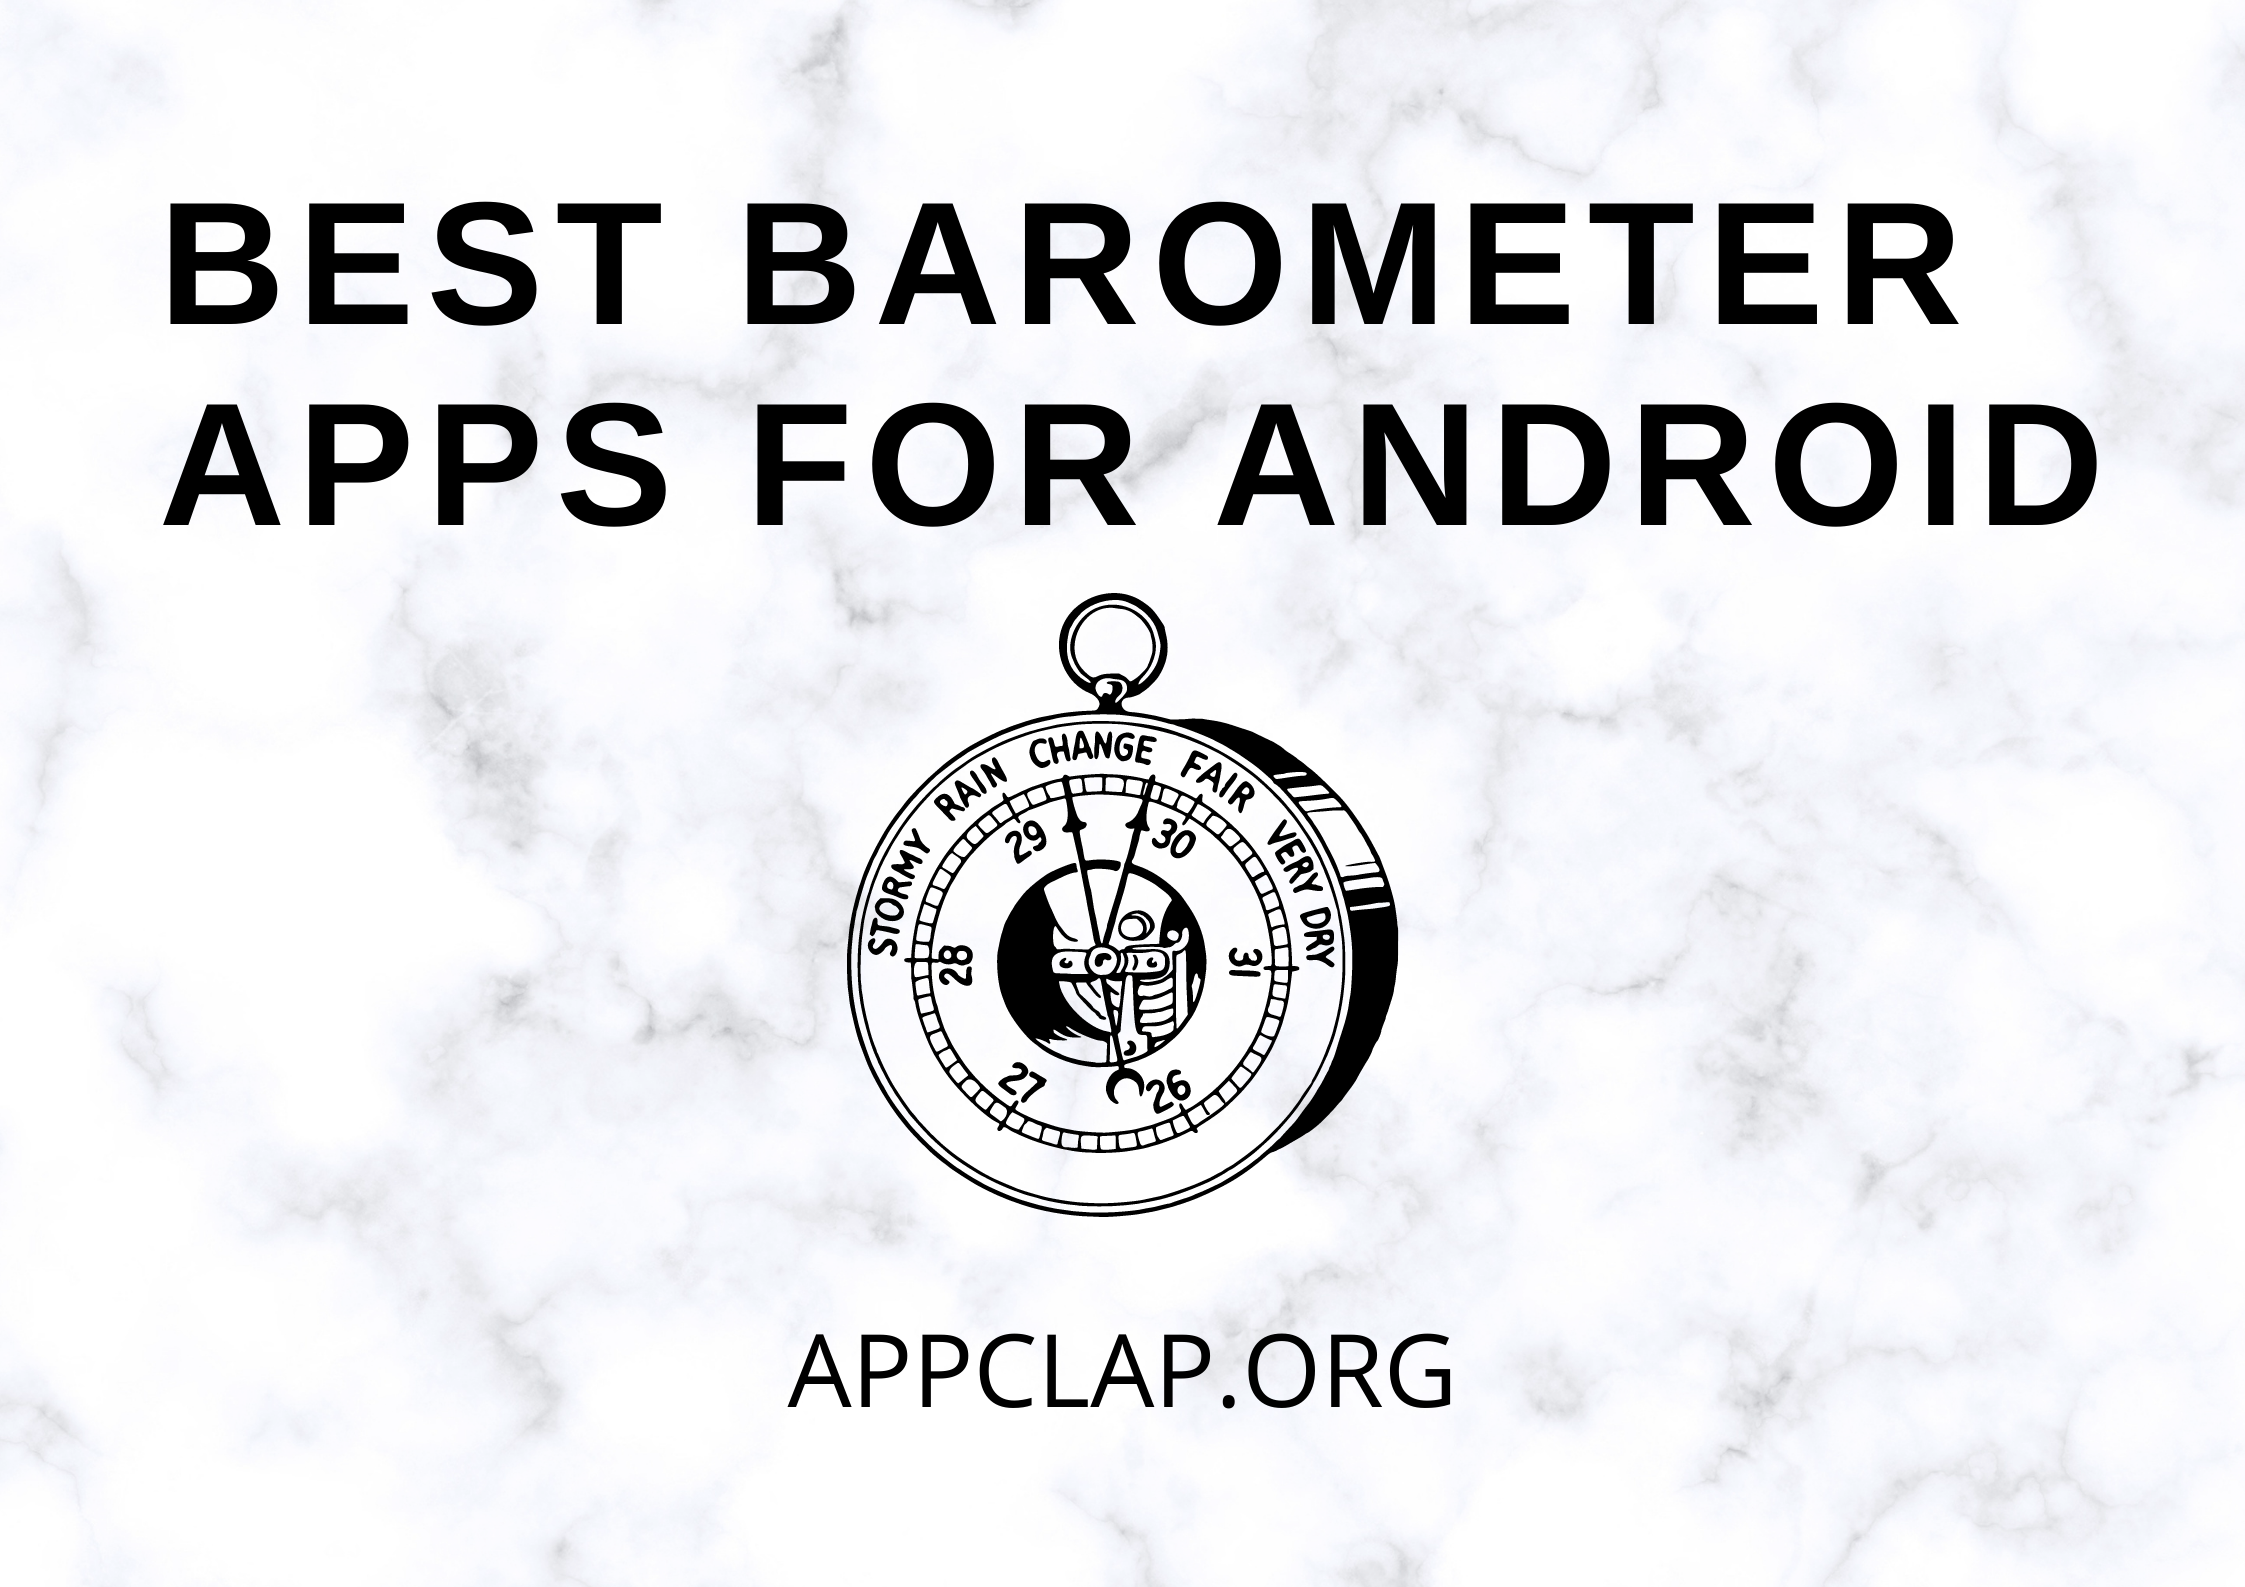 Best Barometer Apps for Android